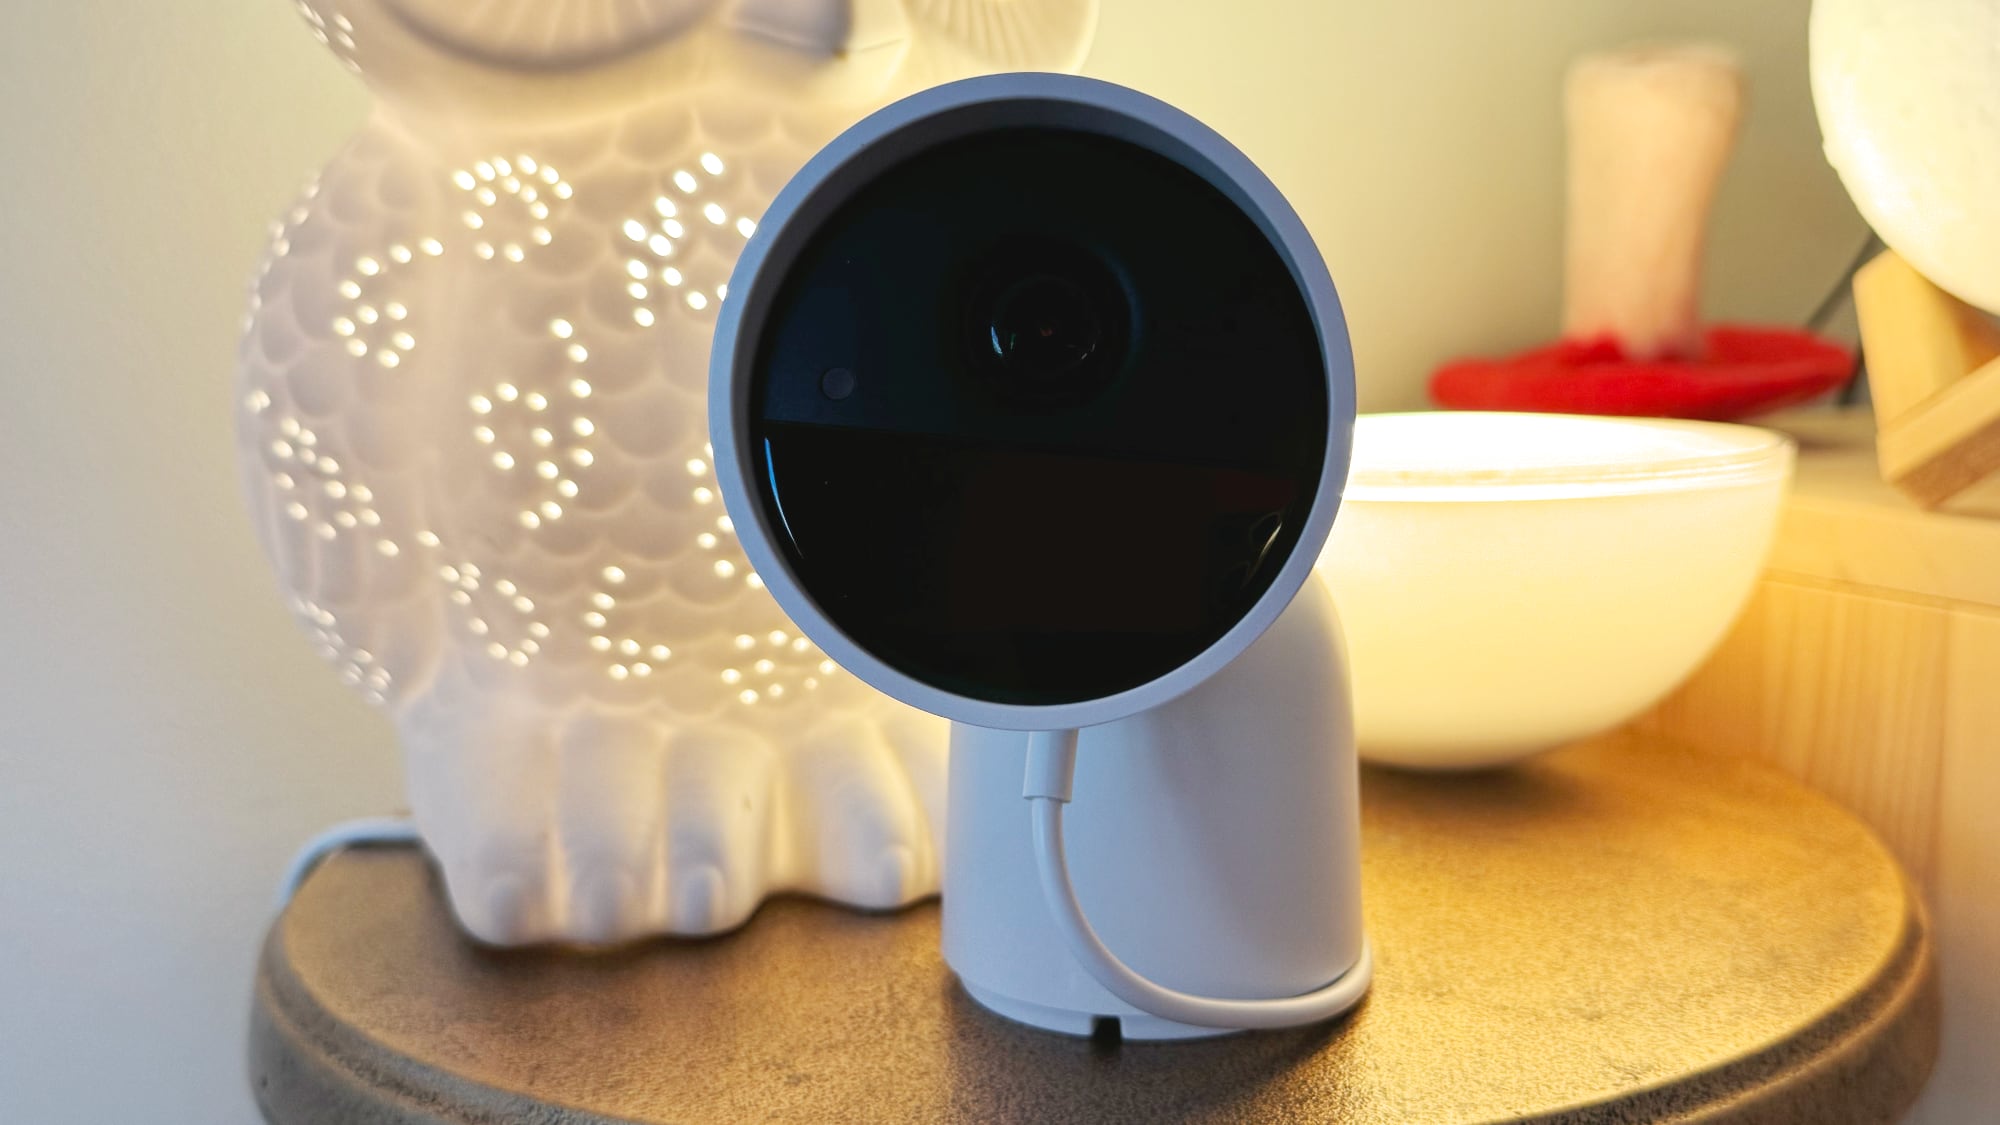 First images surface of Philips Hue smart home cameras - 9to5Mac